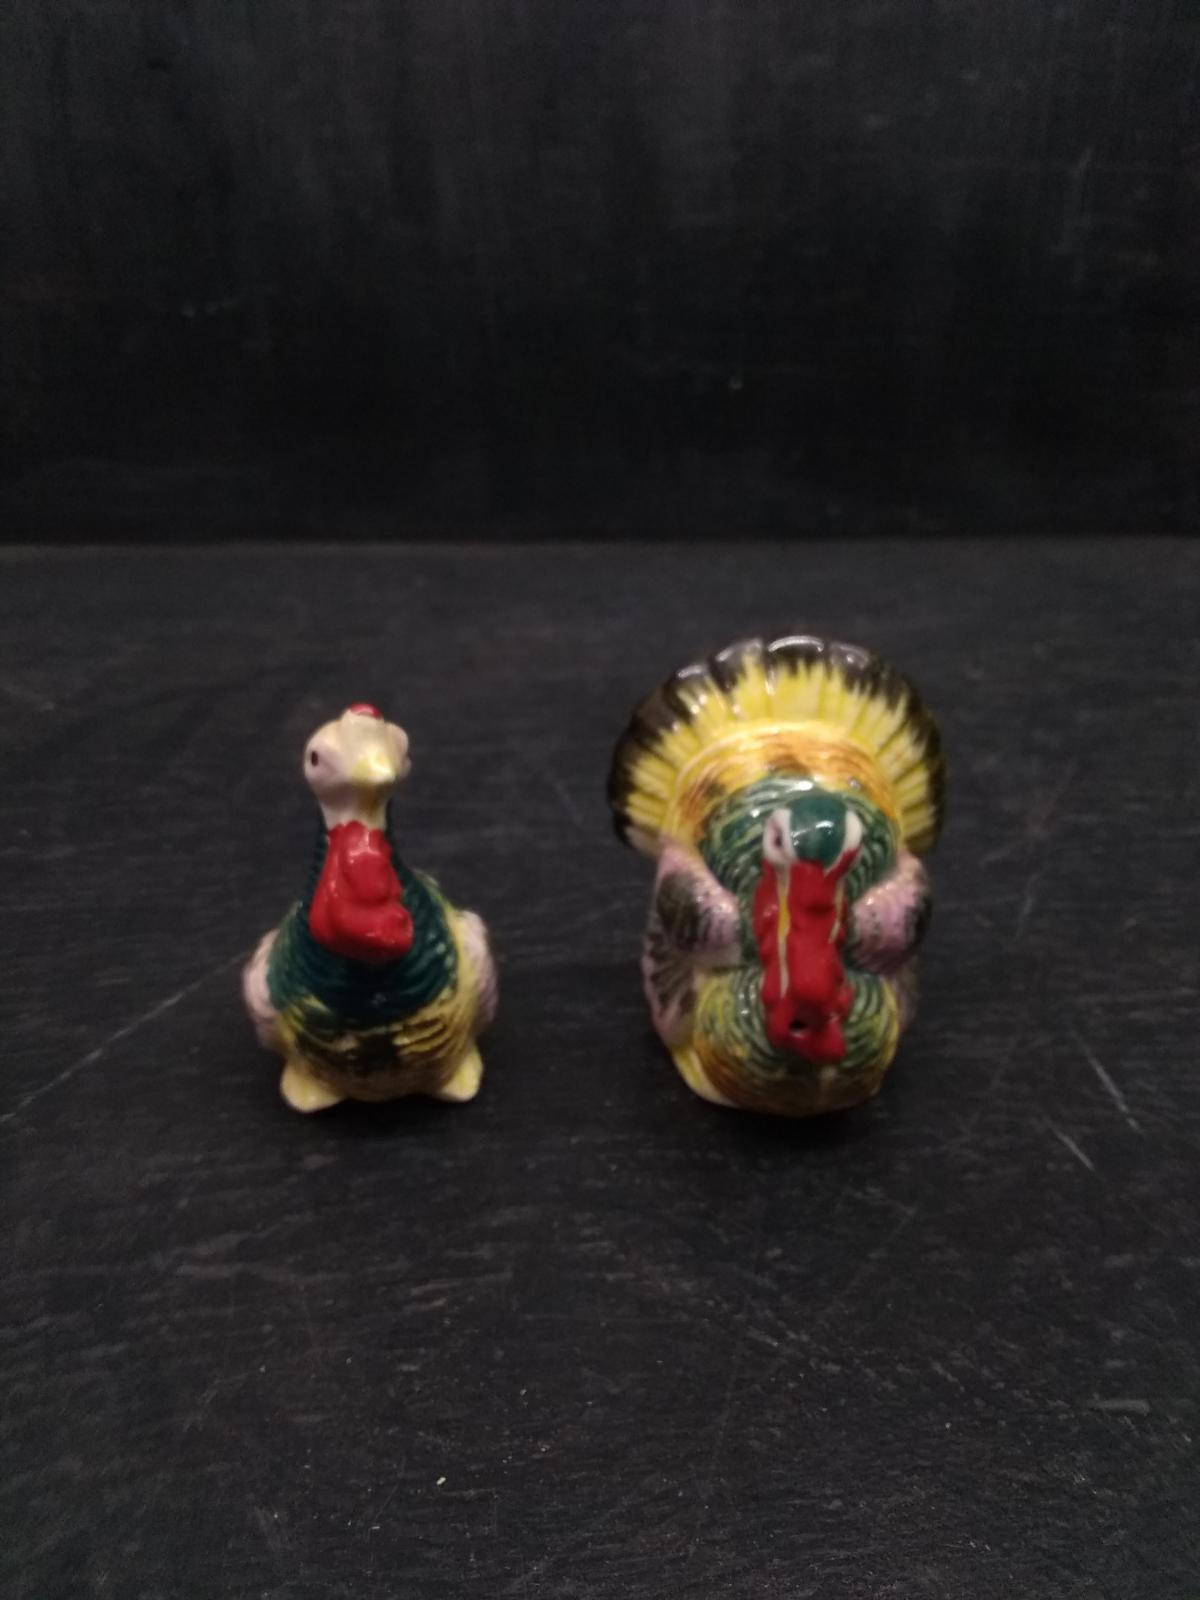 Pair of Novelty Ceramic Turkey Salt and Peppers